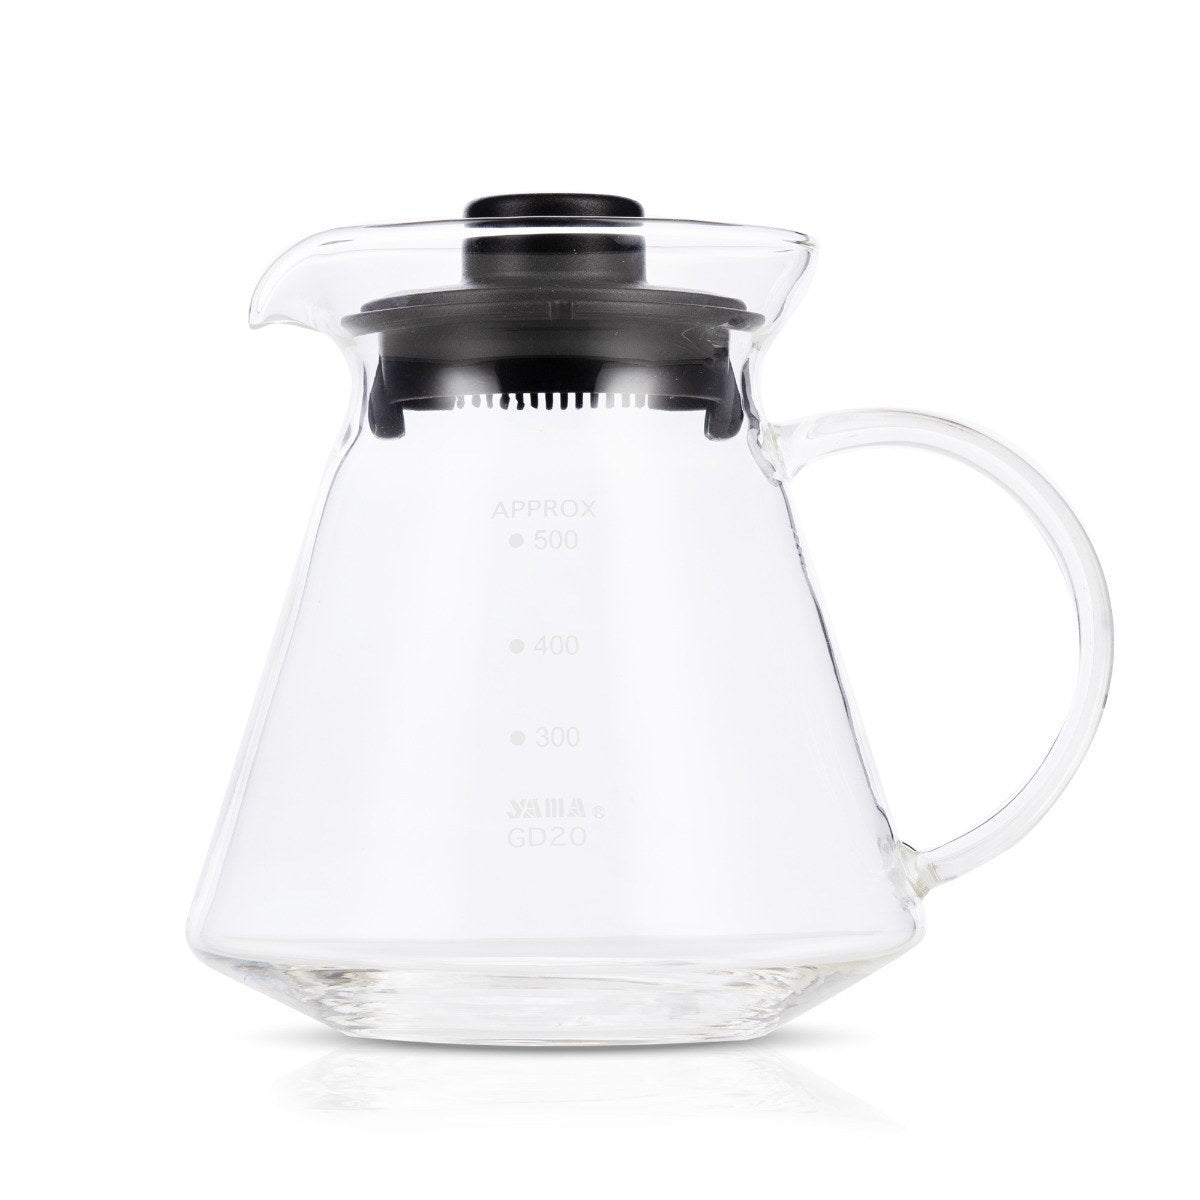 https://cdn.shopify.com/s/files/1/0038/3896/7921/products/yama_decanter_with_lid_eb1b12a4-c12a-49cf-a335-ffe4d1abcc91_2048x2048.jpg?v=1654792927